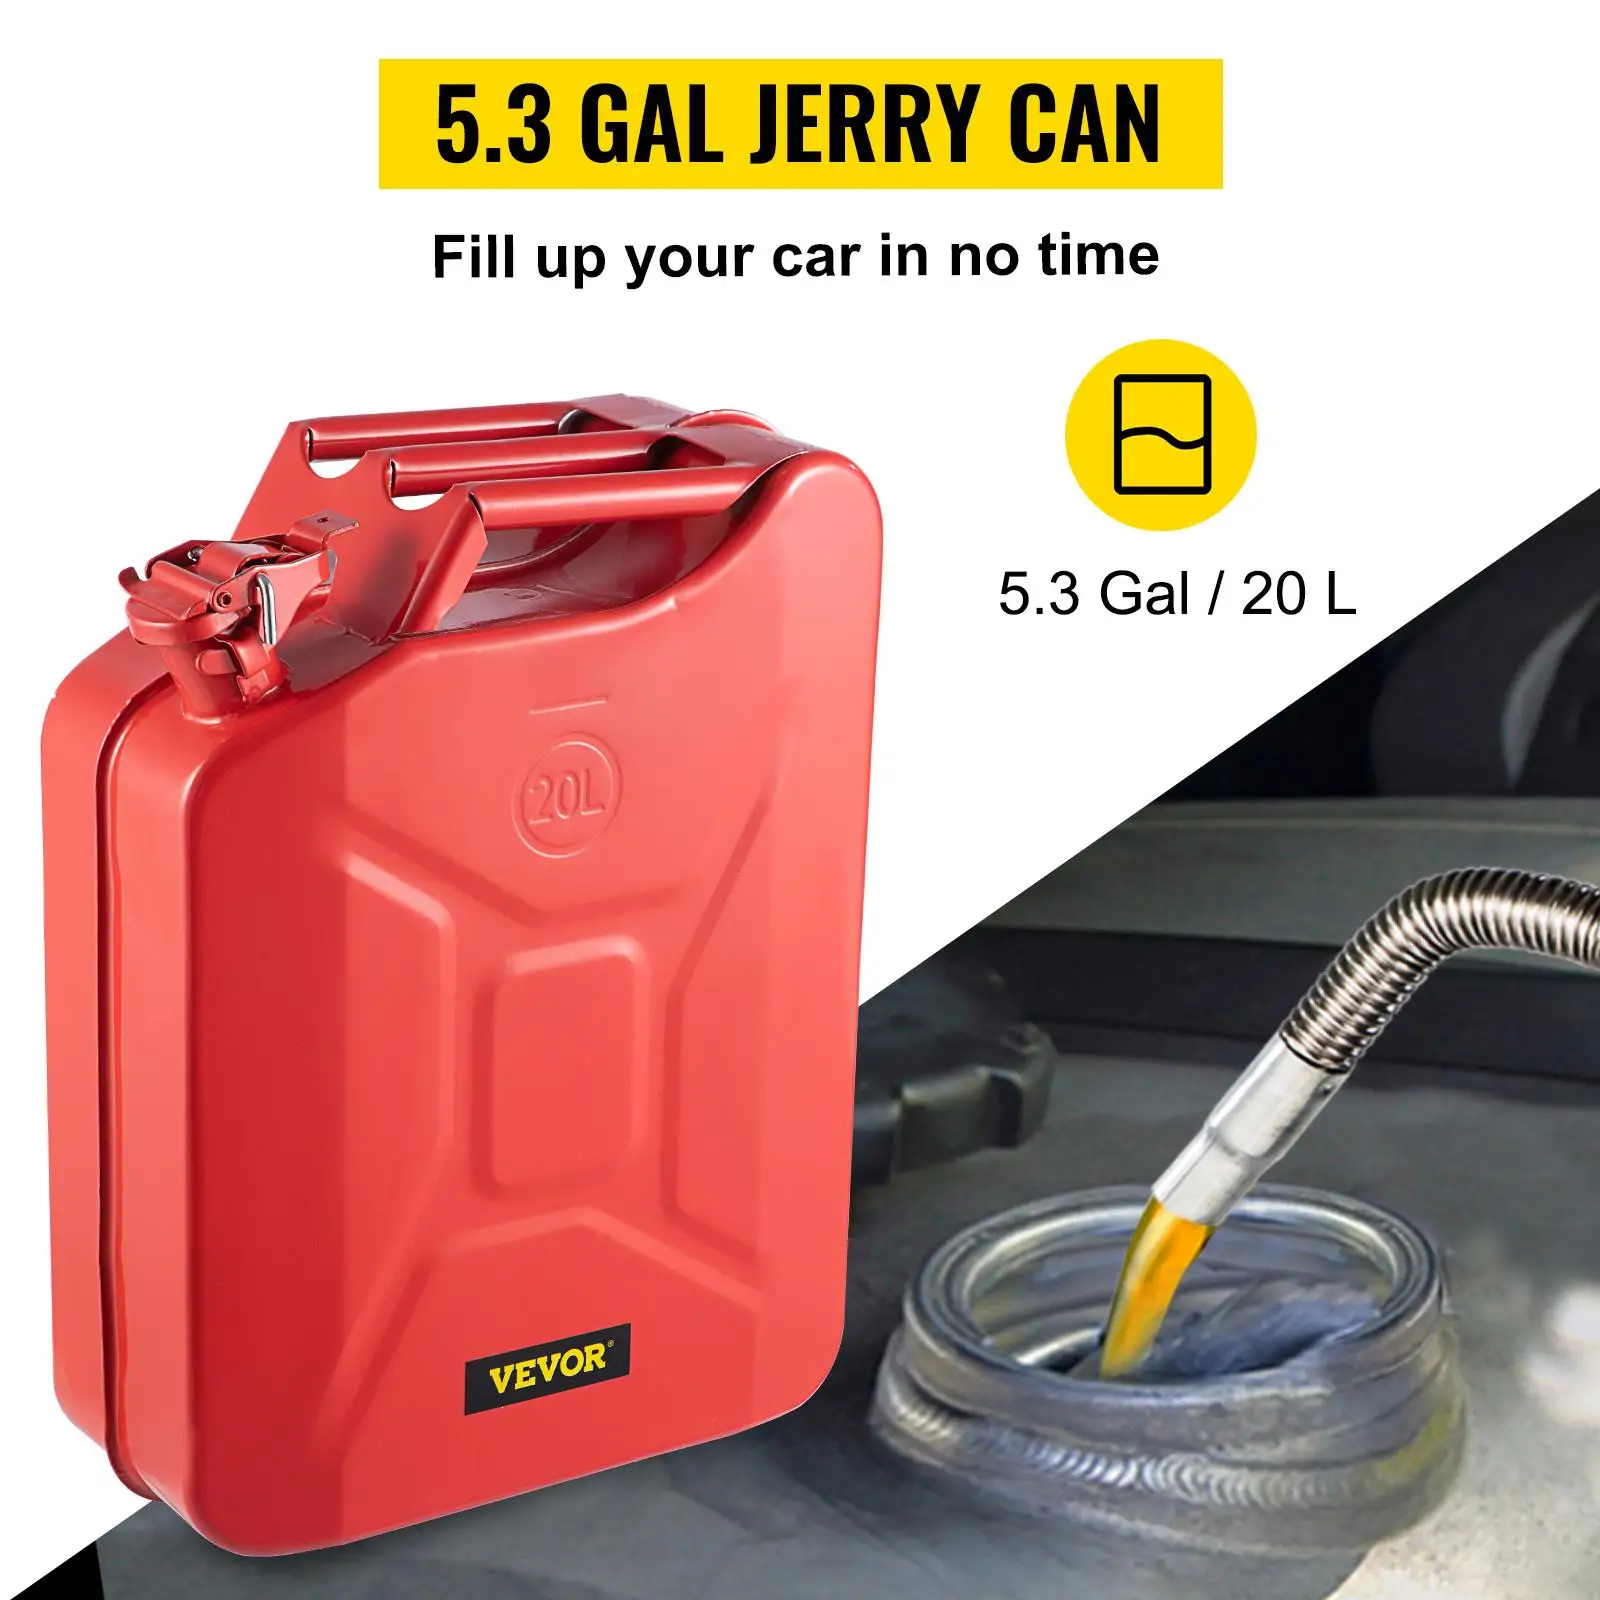 5.3 Gal Jerry Gas Can